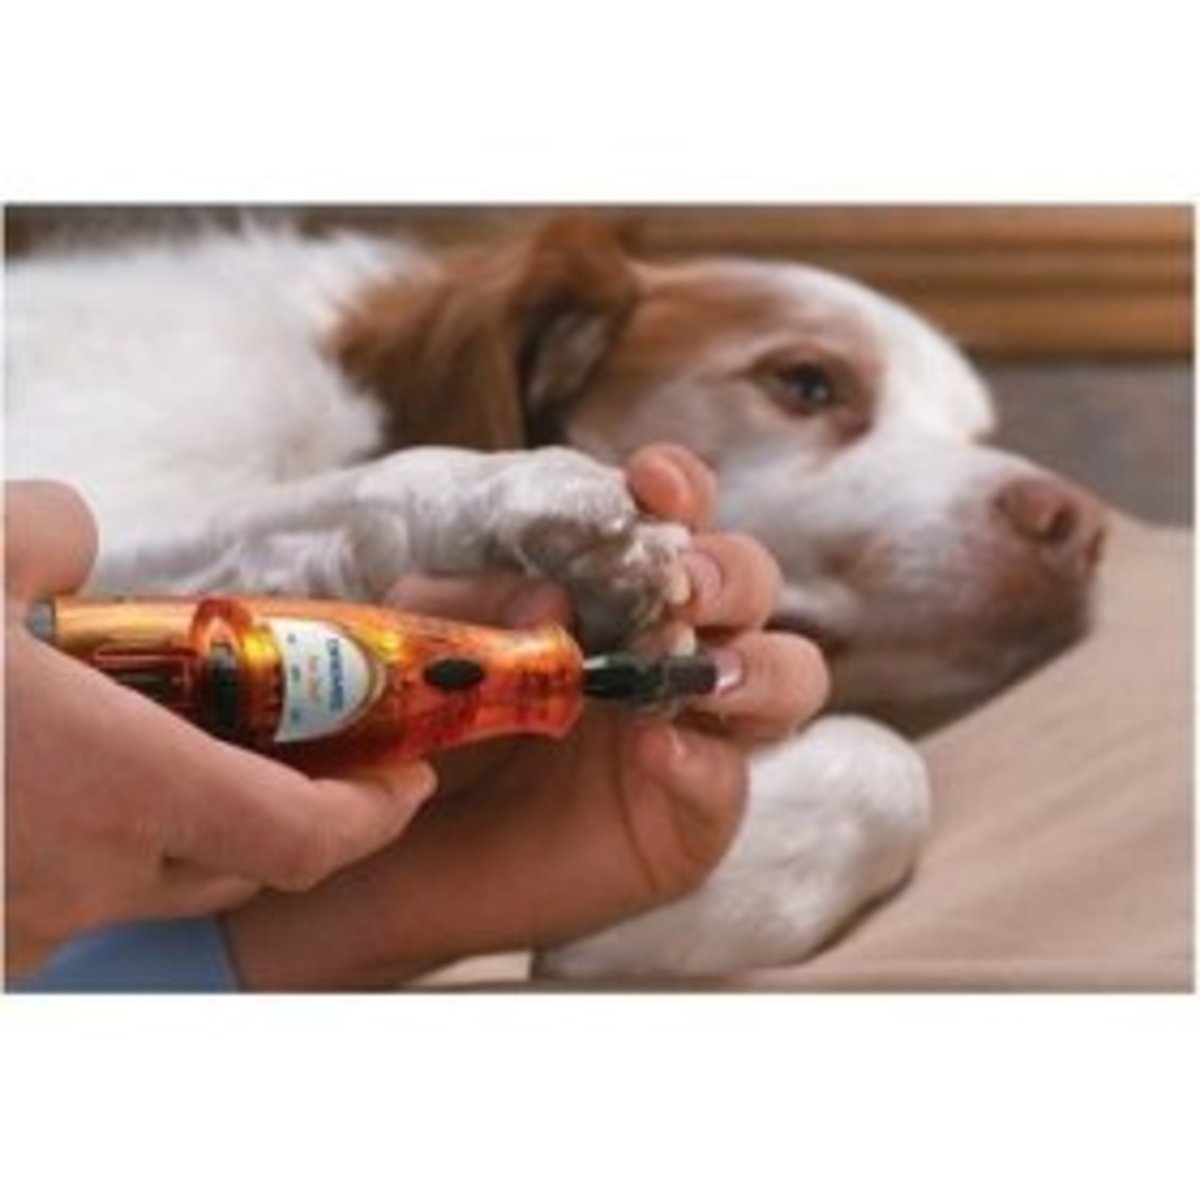 How To Trim Dog's Nails Quick With A Dremel